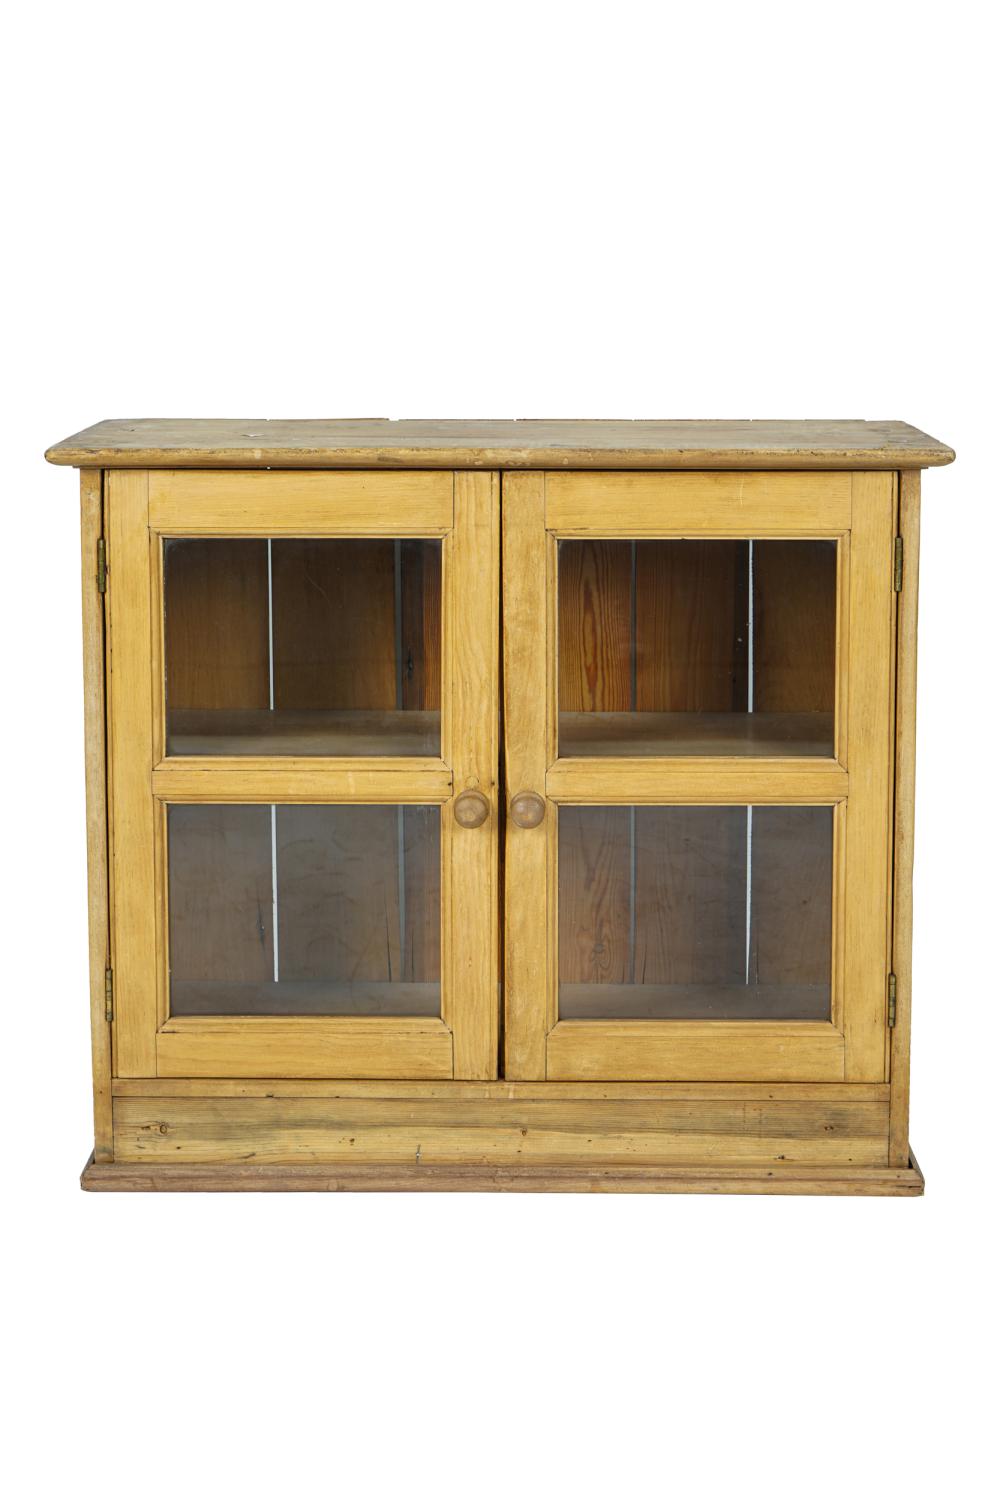 SMALL RUSTIC PINE CABINETwith two 33254b